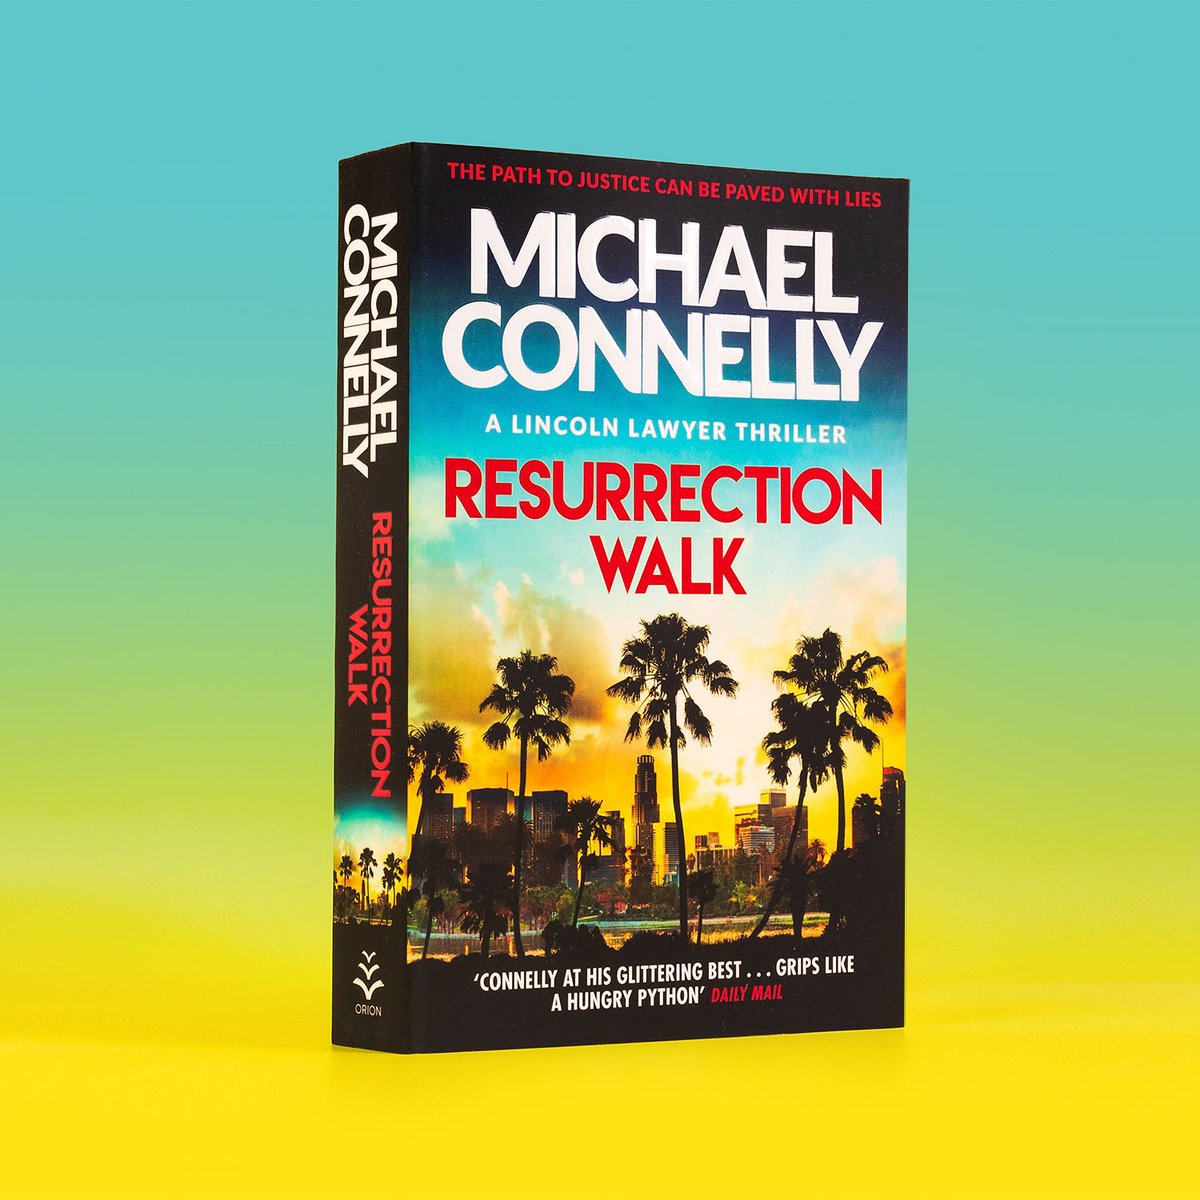 The Lincoln Lawyer returns in the blockbuster new thriller by global bestselling author, @connellybooks. Coming this Thursday in paperback! geni.us/ResurrectionWa…